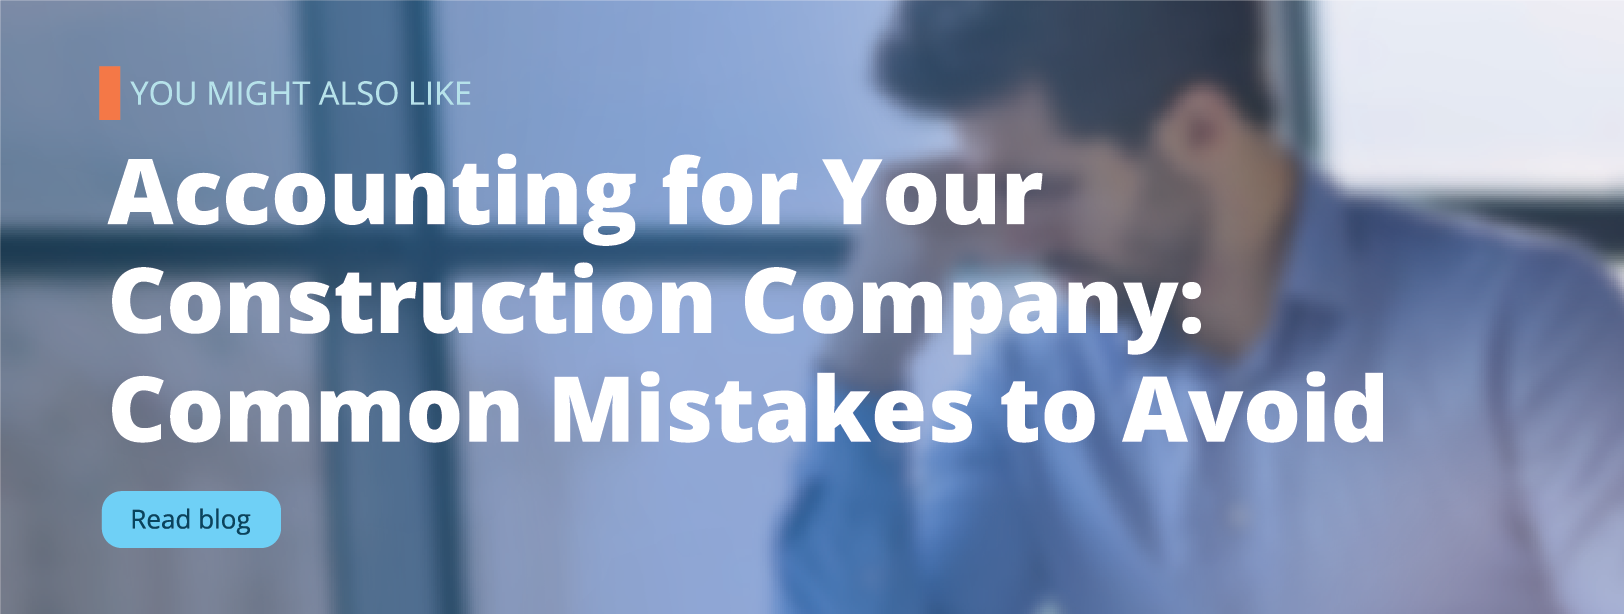 Accounting for Your Construction Company: Common Mistakes to Avoid | Botkeeper